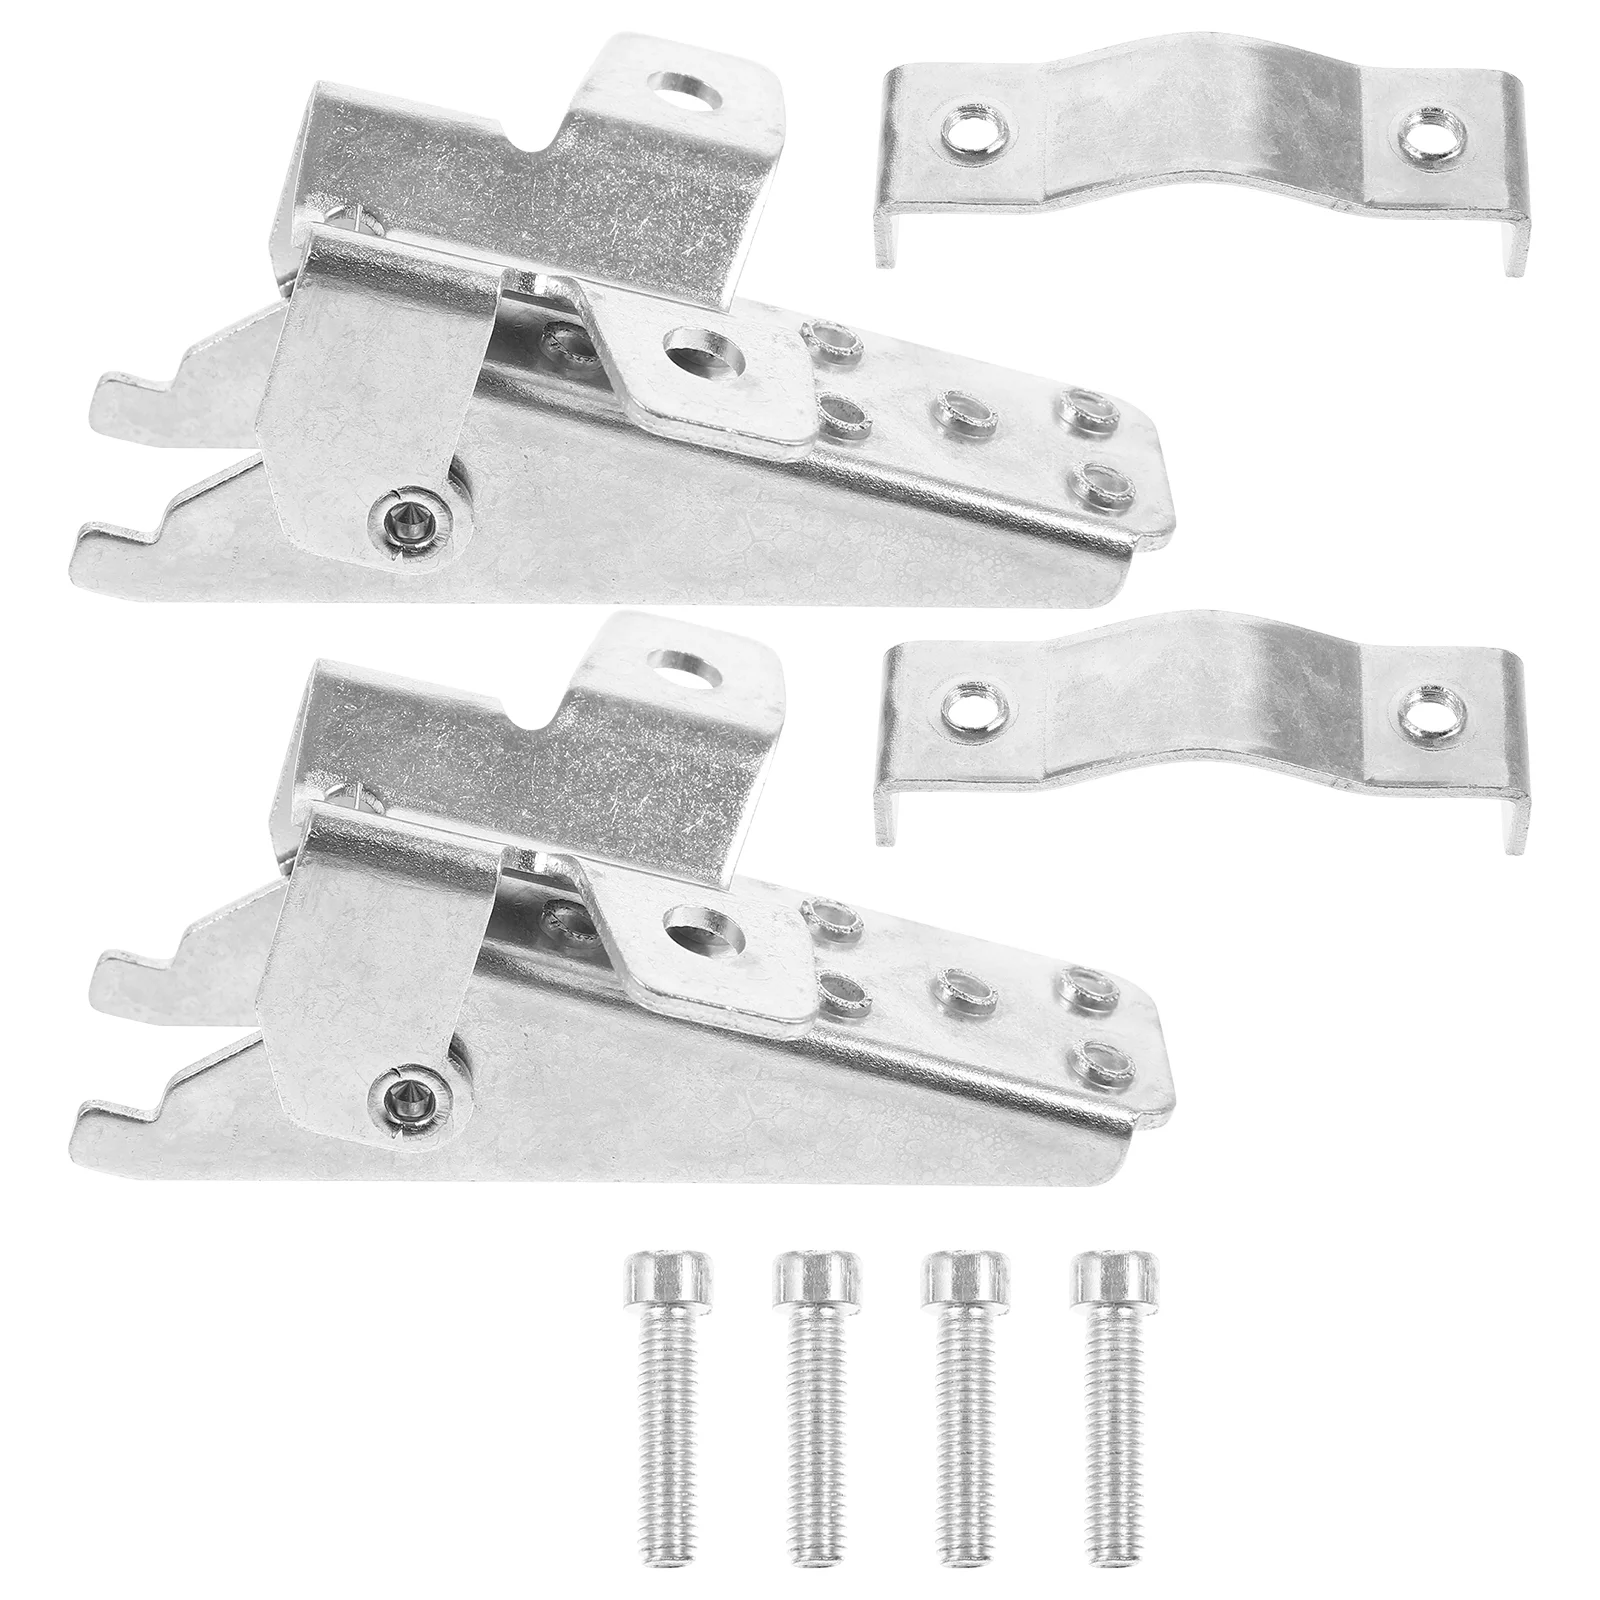 Pedals foot pegs universal for foldable motorbike accessories clamp type clamp on metal thumb200